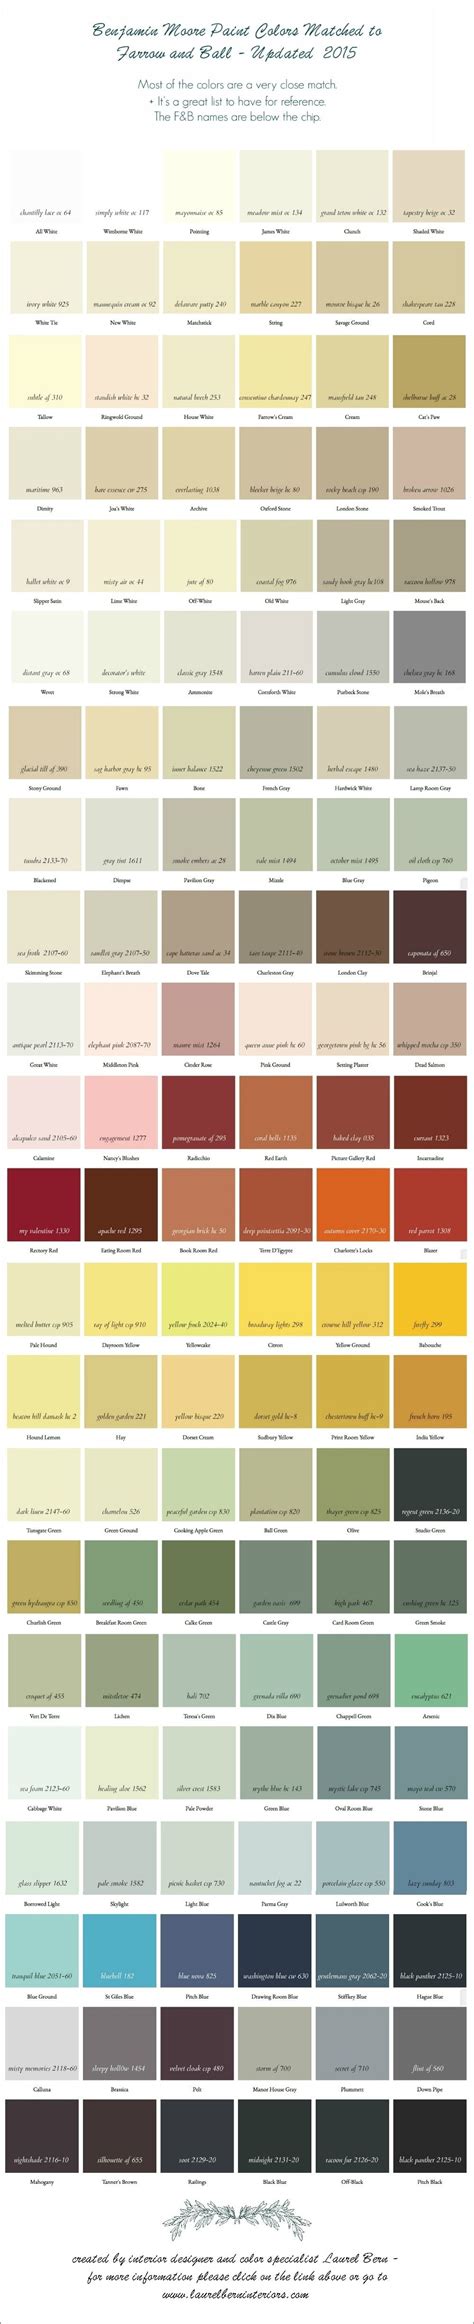 Benjamin Moore Paint Colors Matched To Farrow And Ball 2015 Matching